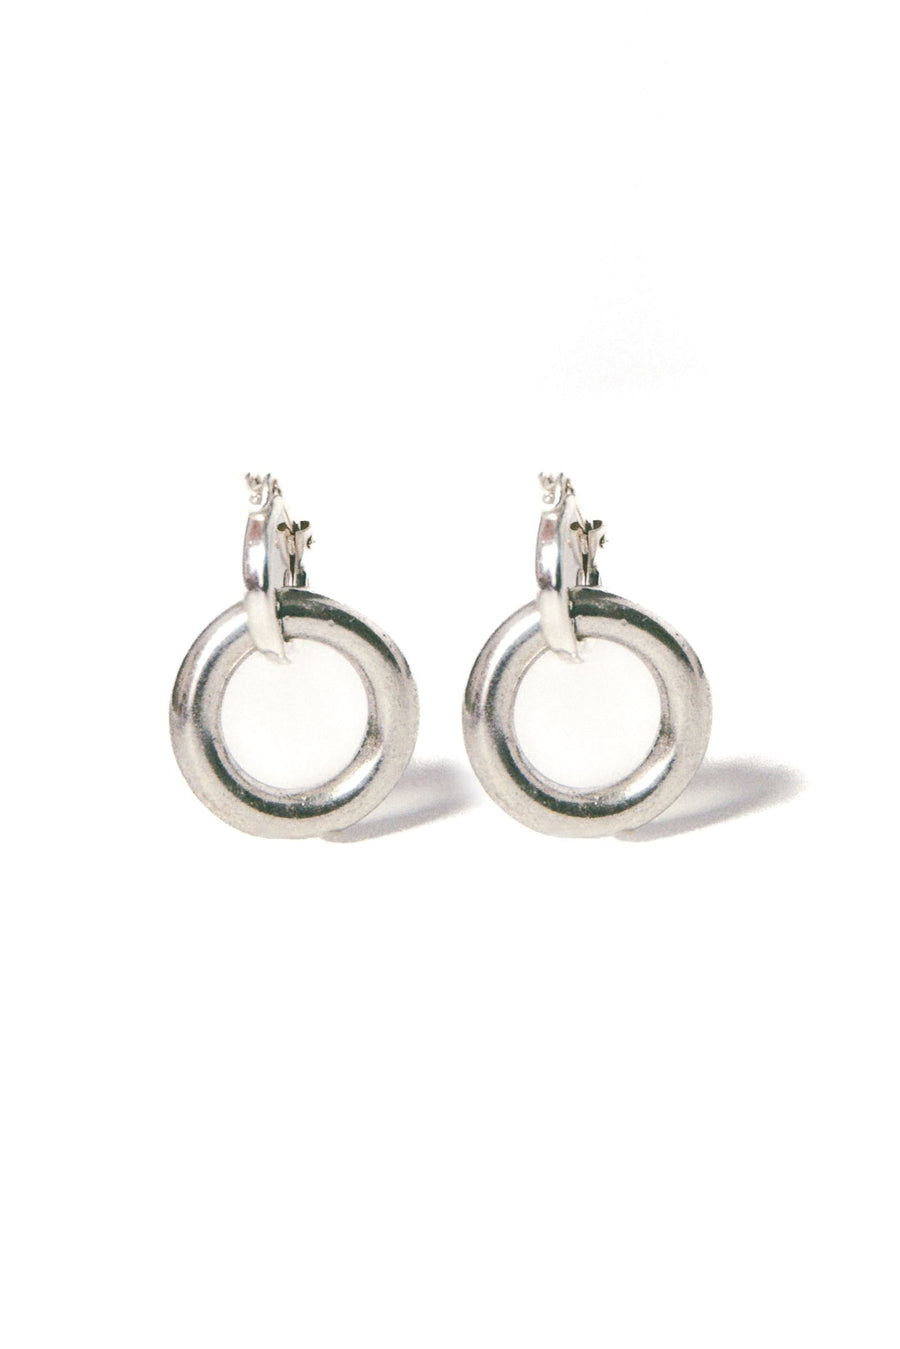 Child of Wild Jewelry Silver Orb Chain Earrings